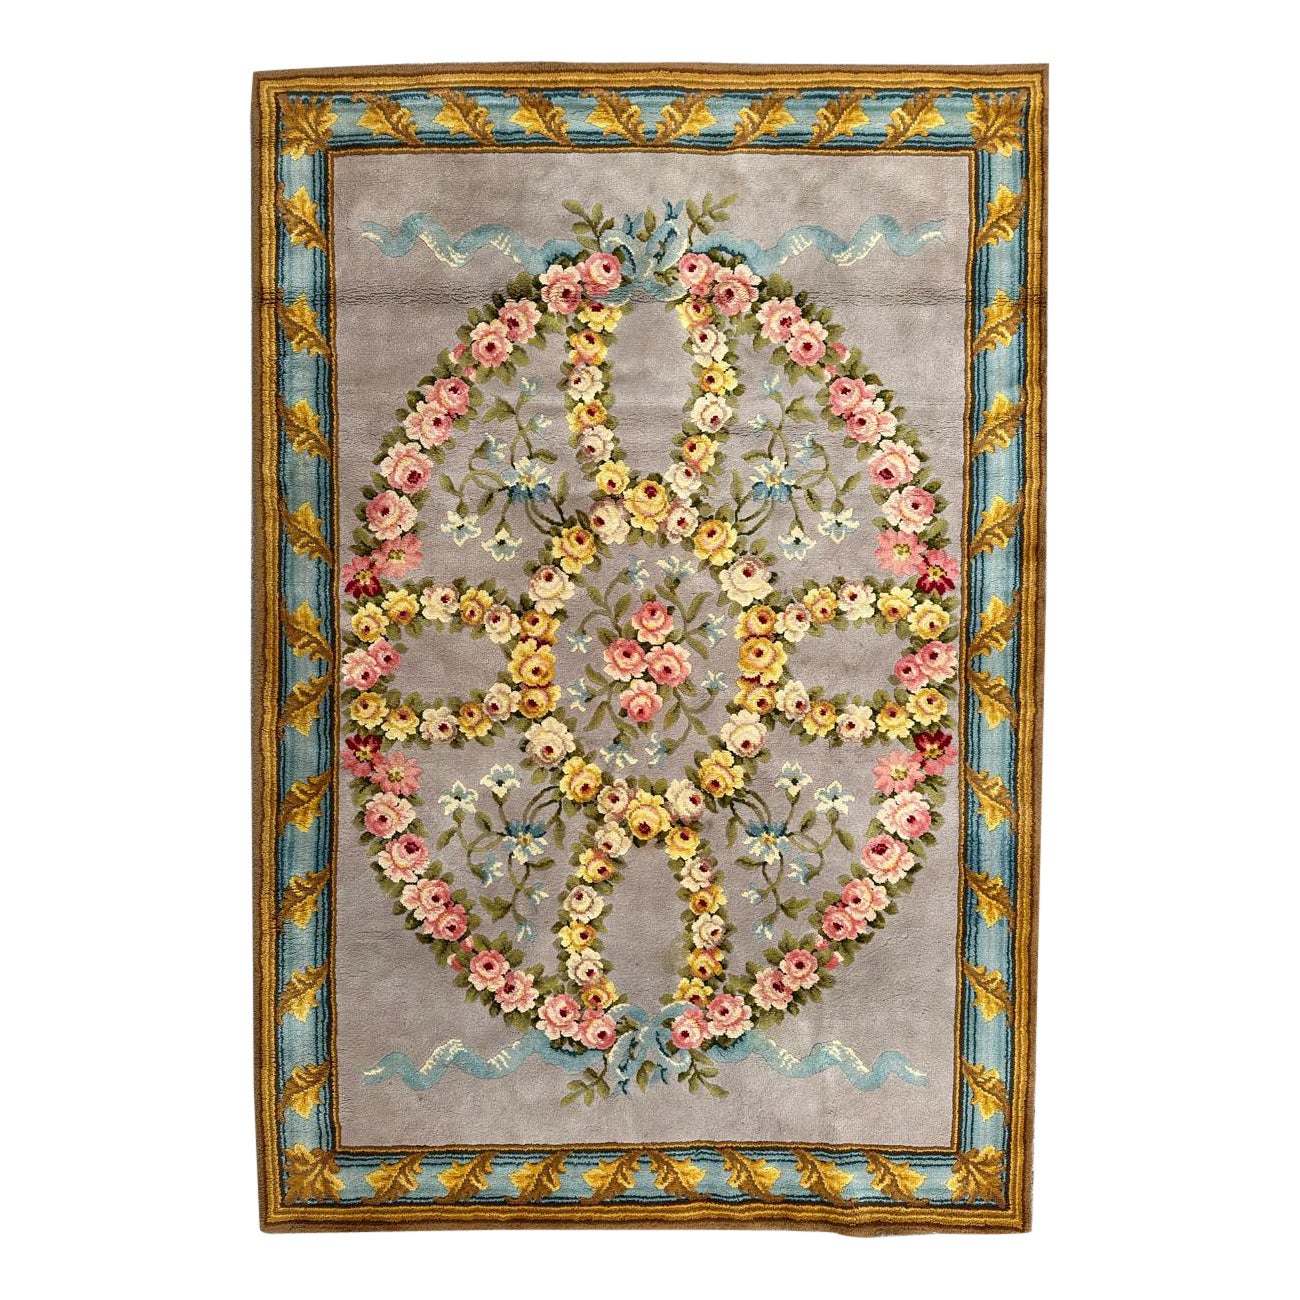 Bobyrug’s Very nice antique french savonnerie rug 